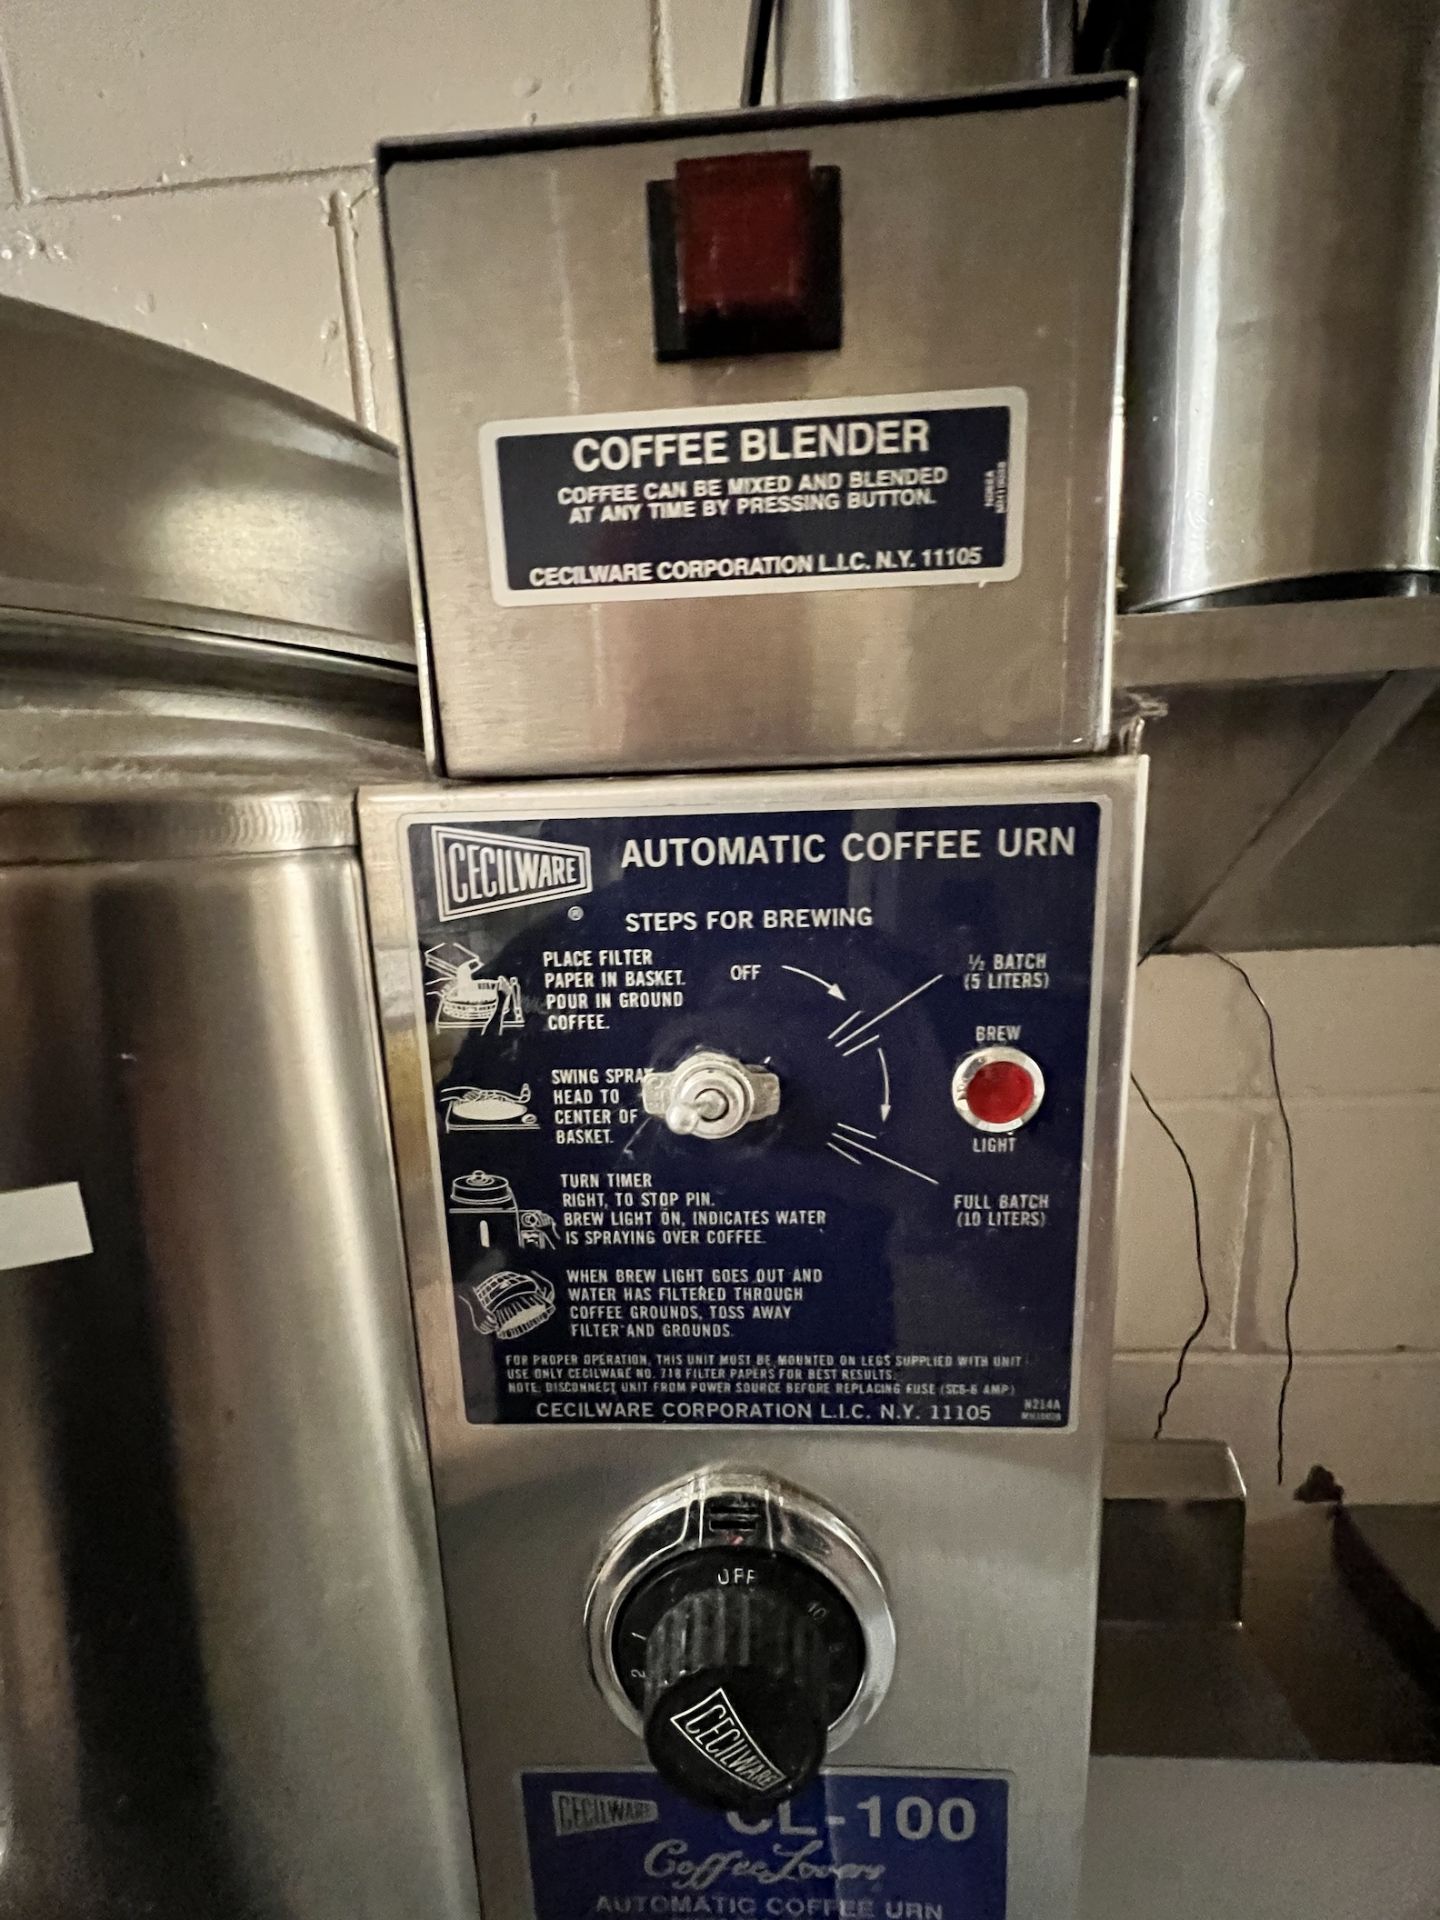 CECILWARE COFFEELOVERS CL-100 AUTOMATIC COFFEE URN (SIMPLE LOADING FEE $55) - Image 4 of 4